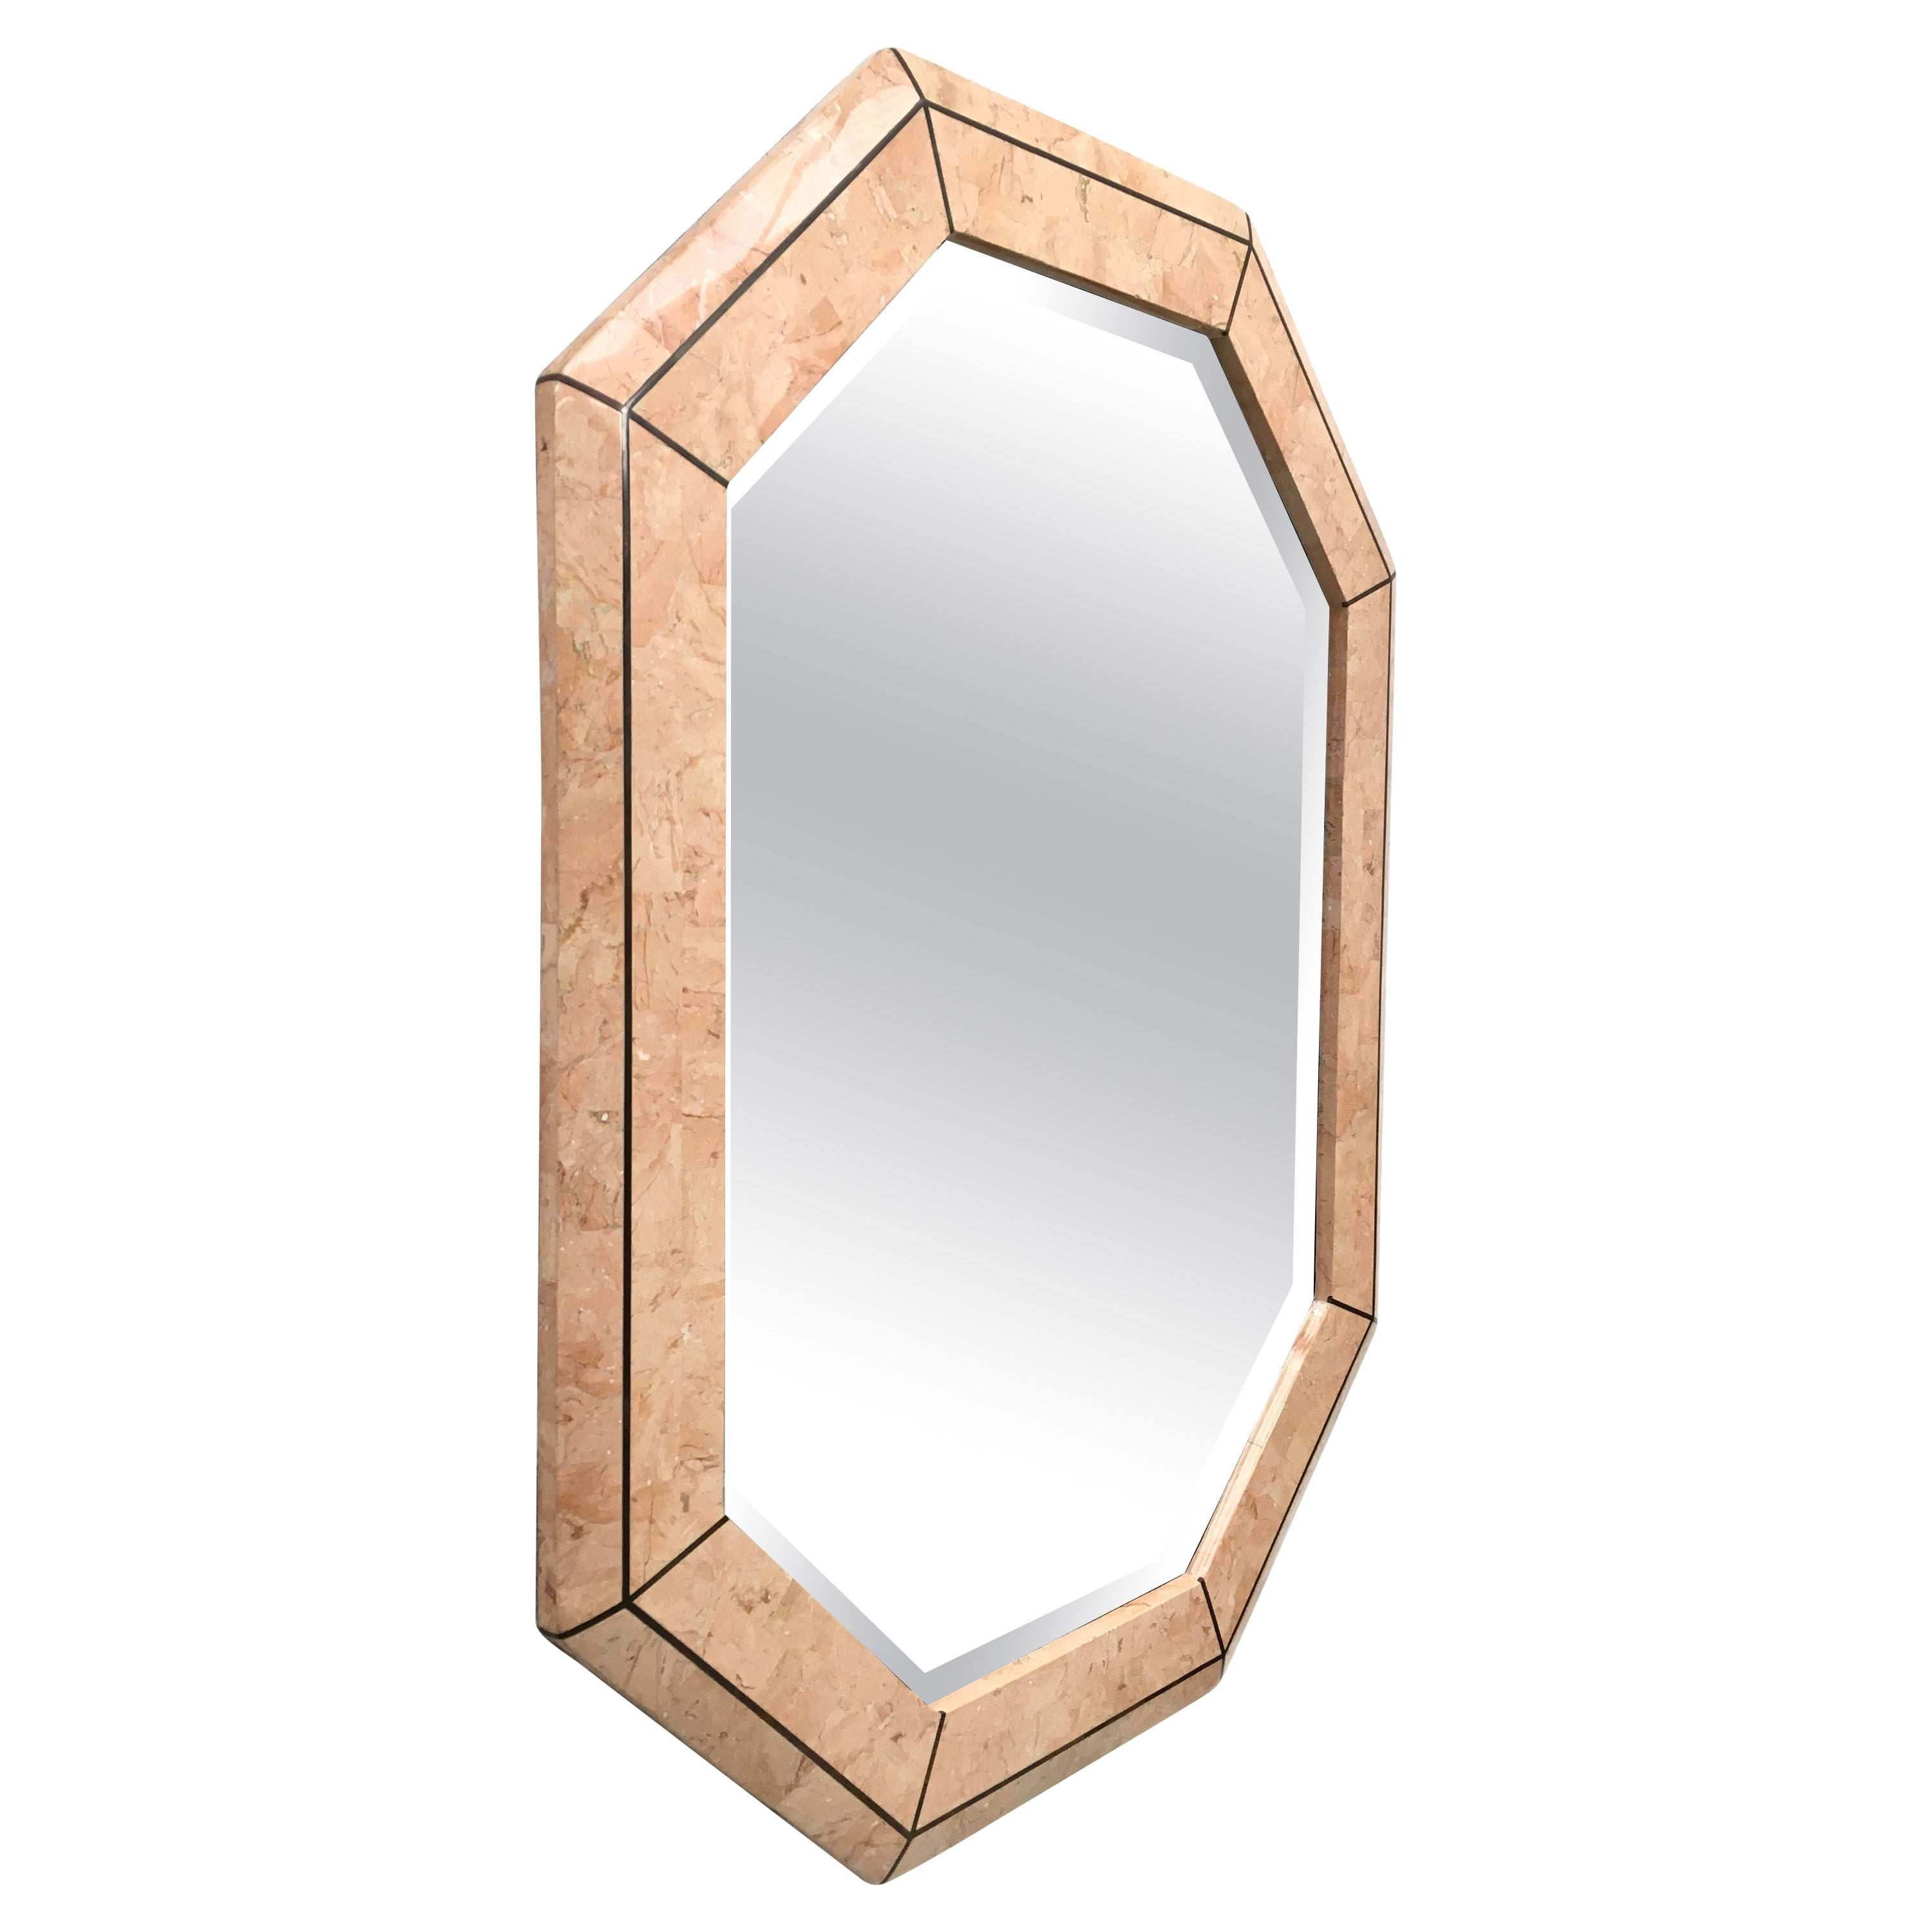 Maitland-Smith Pink Marble Veneer Octagonal Mirror Brass Trim Signed 1980 For Sale